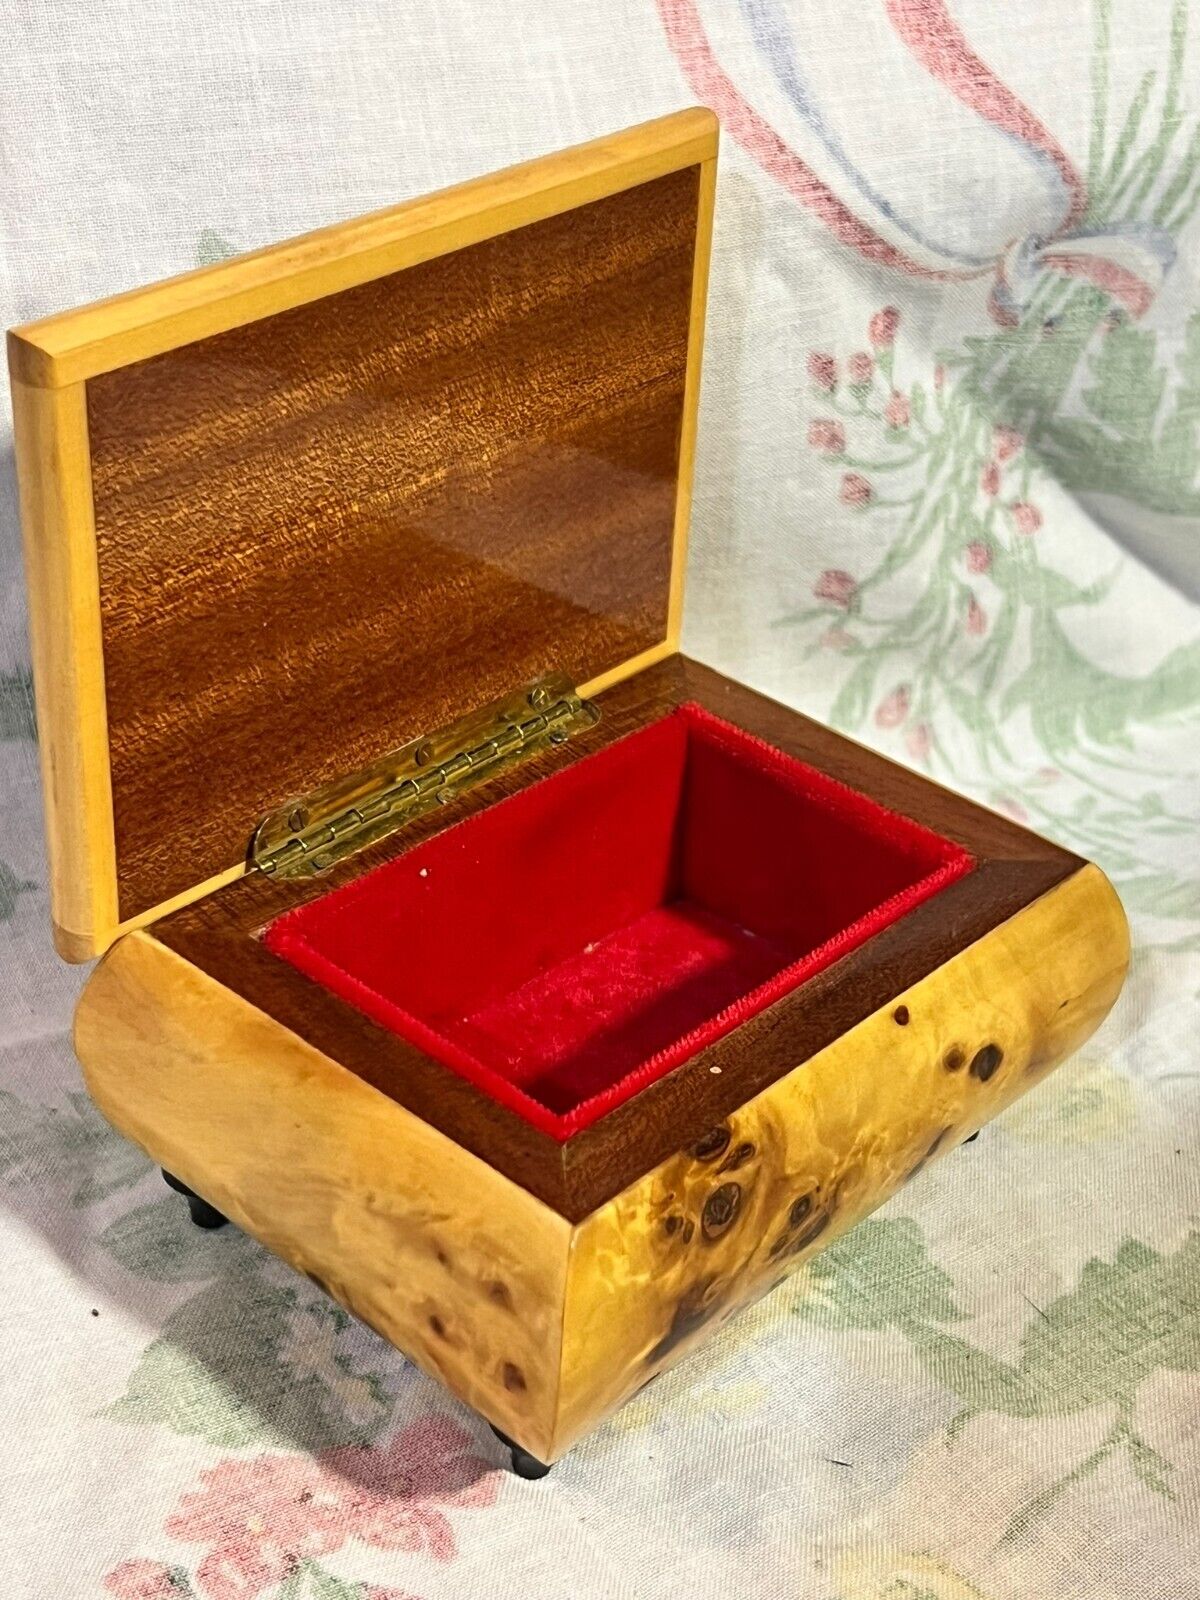 Vintage Italian Wooden Jewelry Box w/Rose Detail and Lacquer Finish